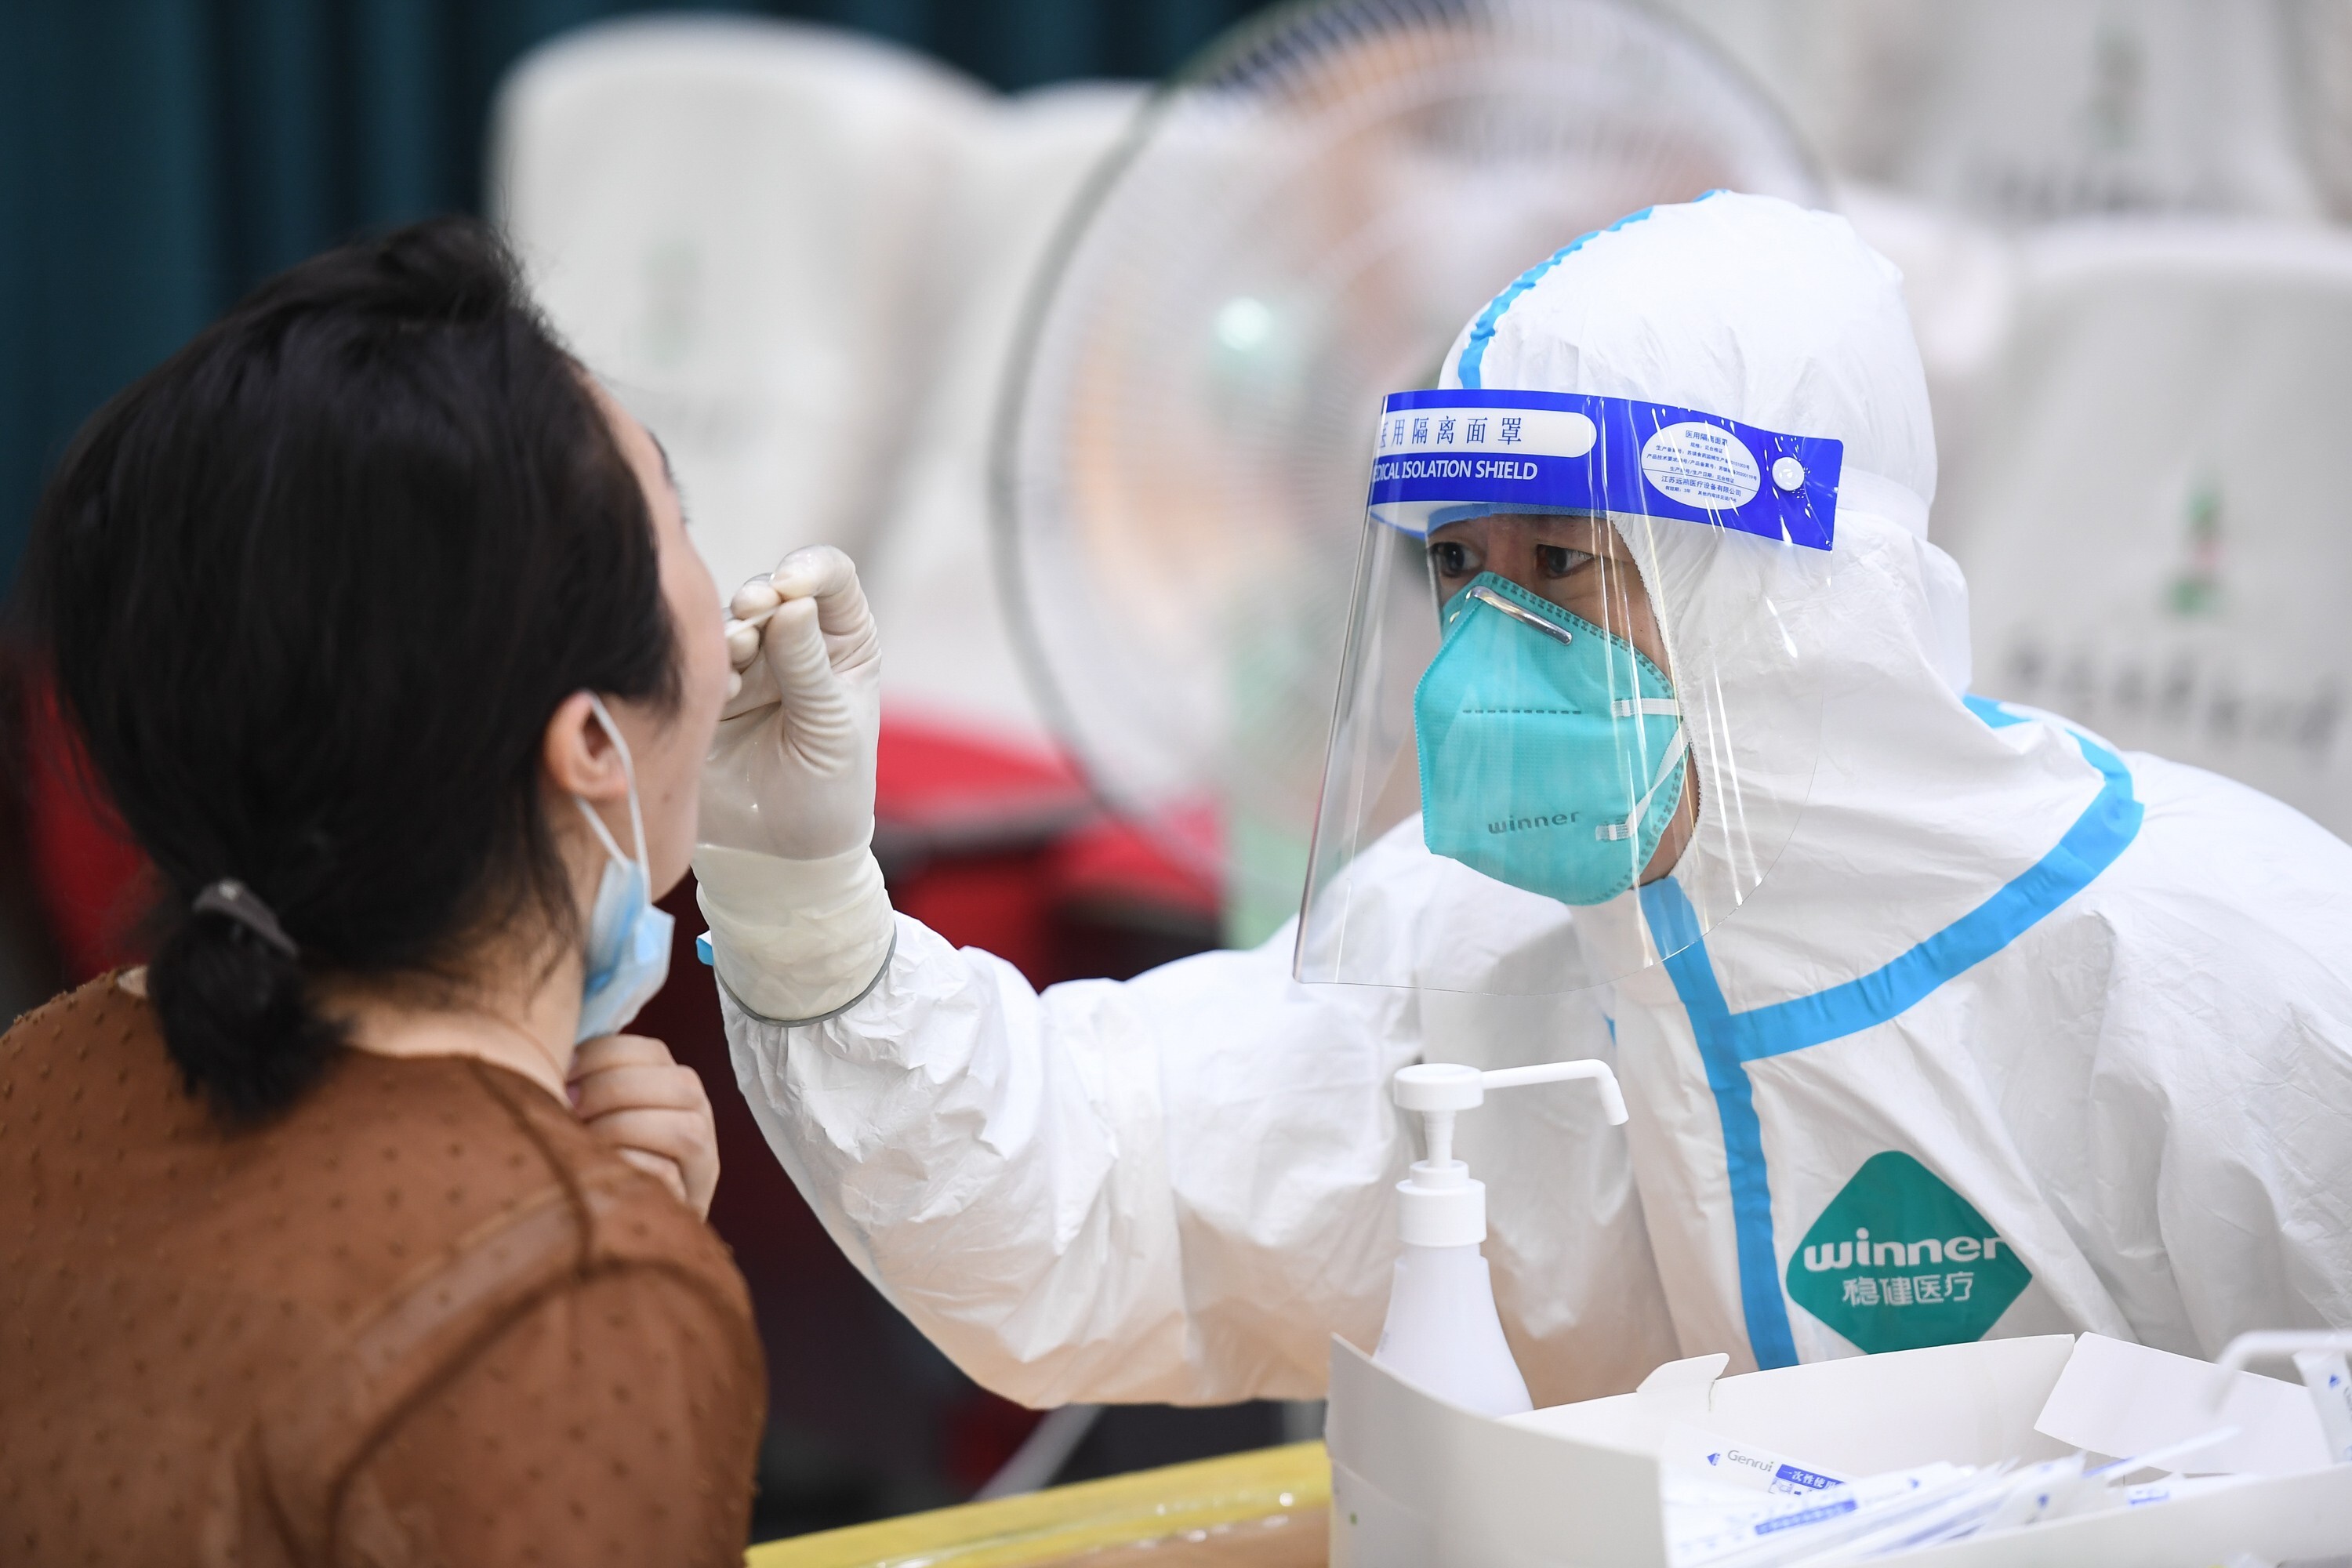 A resident gets tested in Nanjing last week. China’s latest outbreak, fuelled by the Delta strain, appears to be easing. Photo: Xinhua